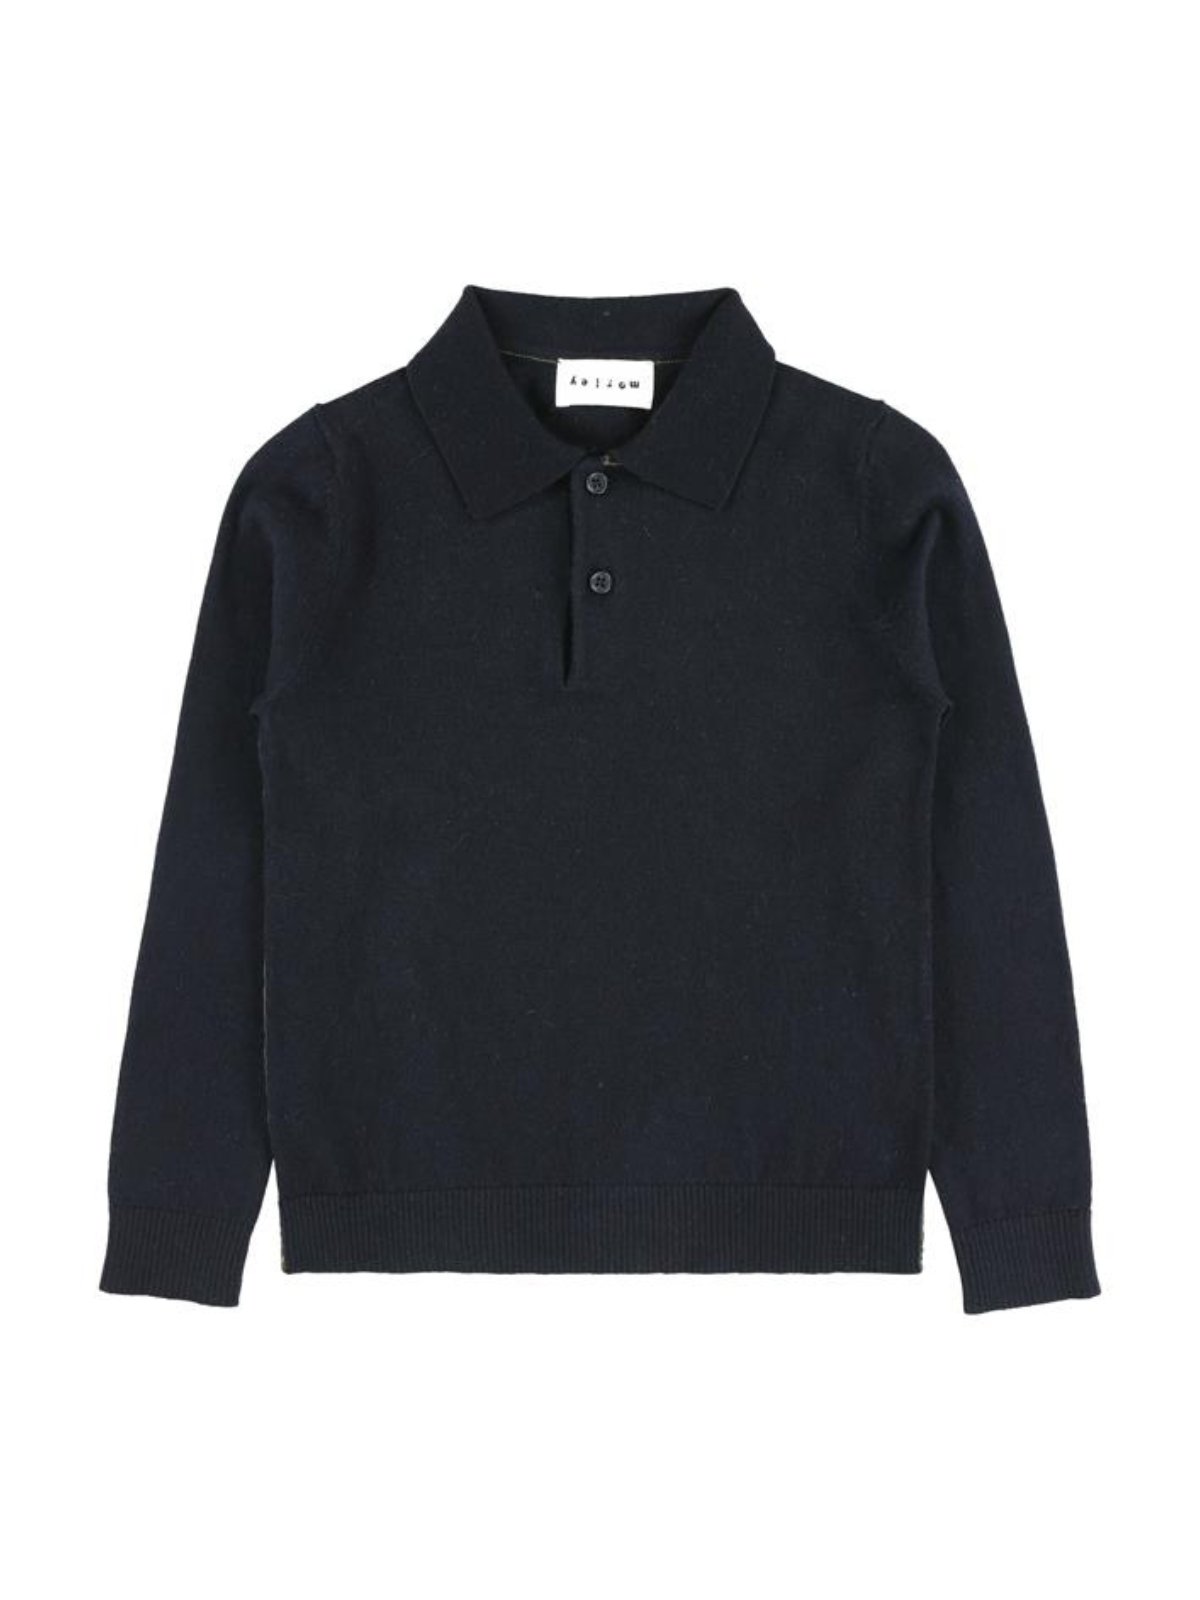 Donato Black Knit Buttonless Long Sleeve Polo With White Stripe Detail –